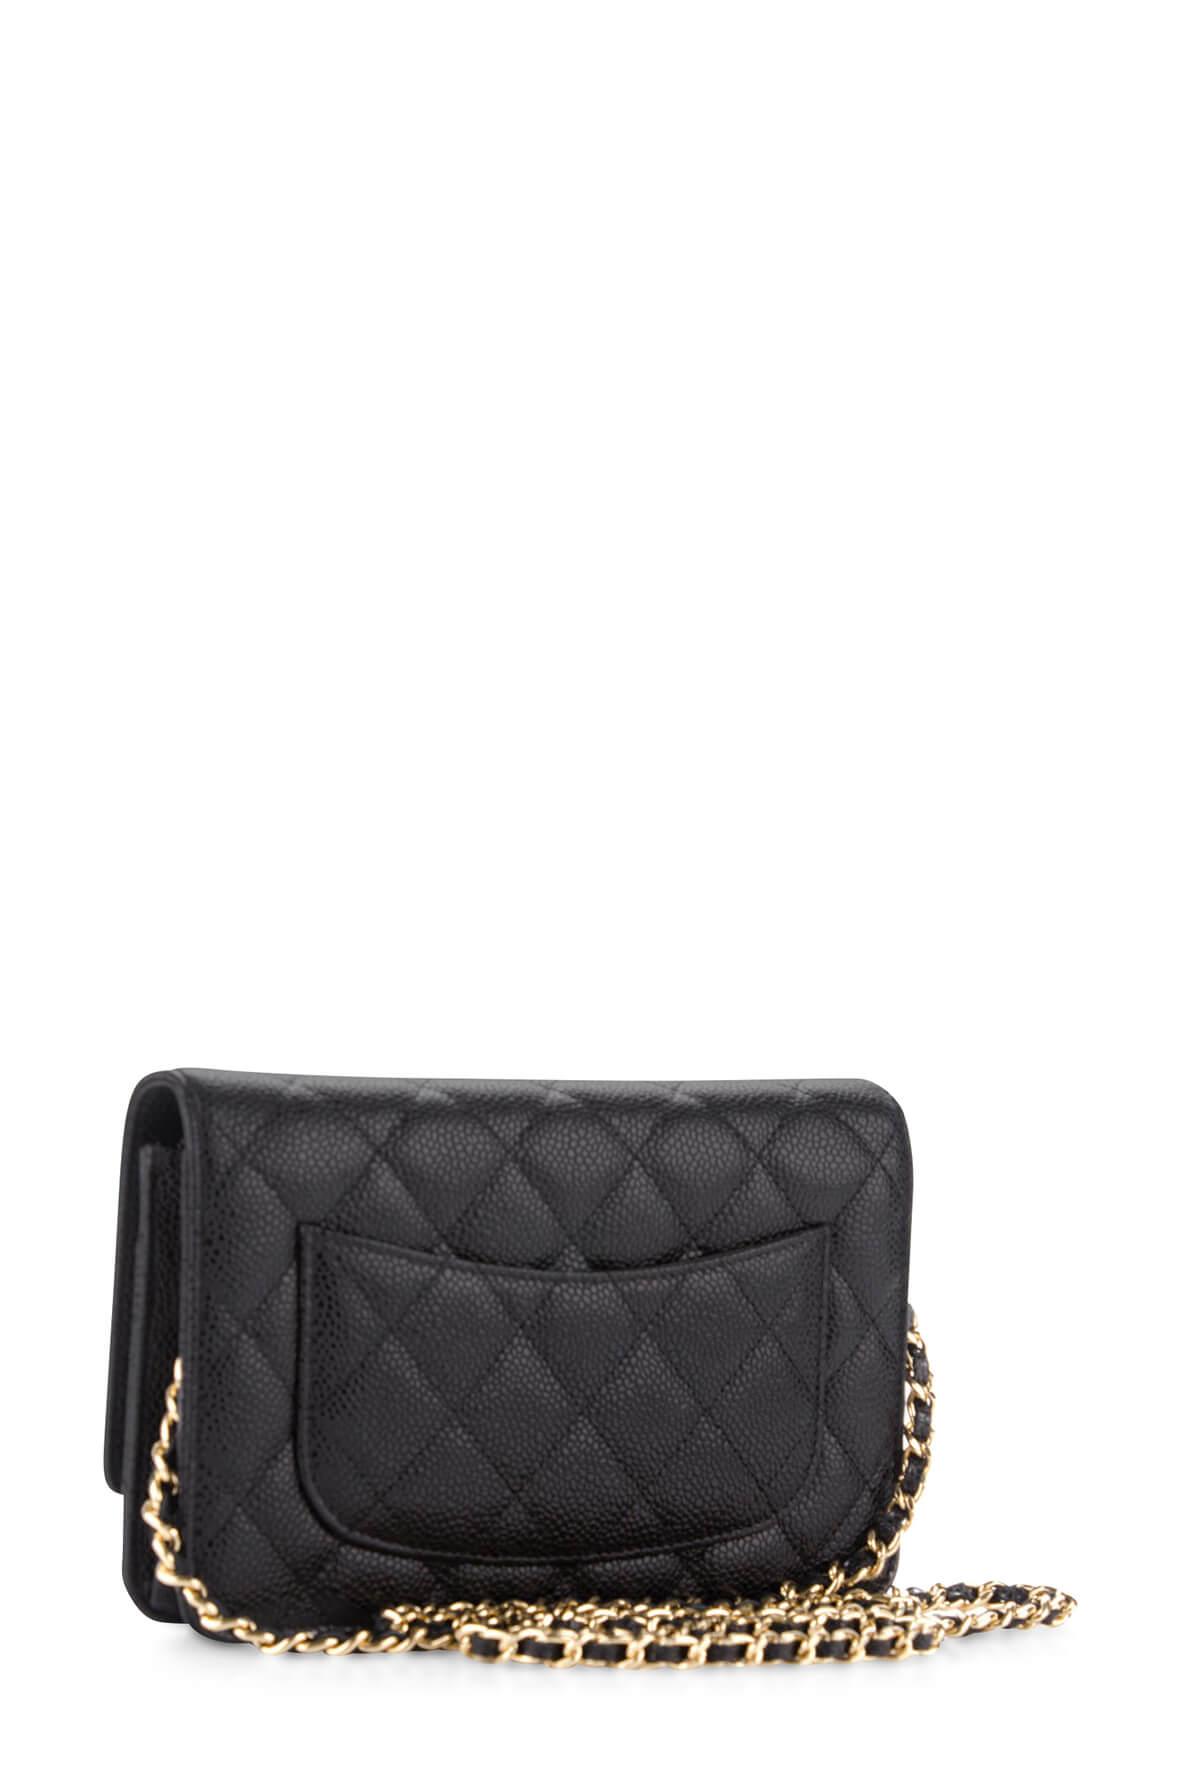 Chanel Classic Quilted Wallet on Chain Black Caviar – ＬＯＶＥＬＯＴＳＬＵＸＵＲＹ